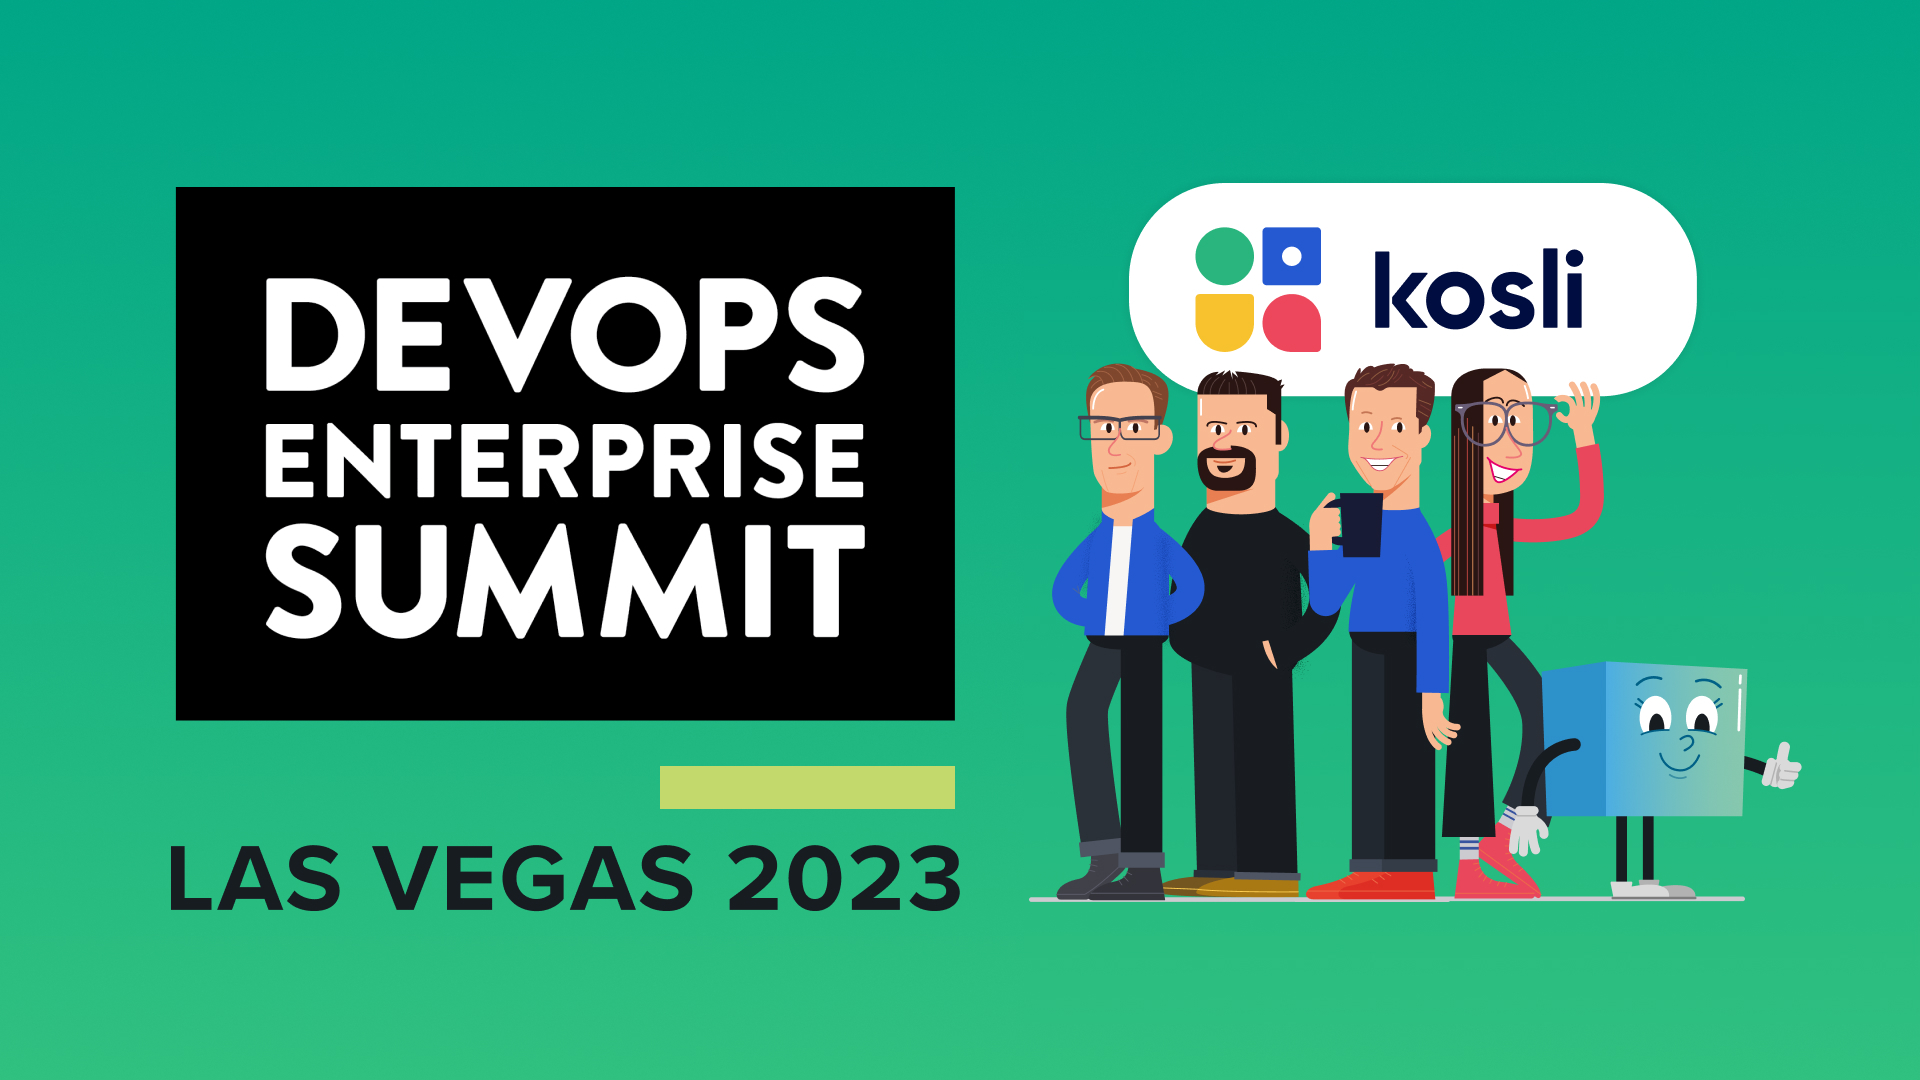 green background with devops enterprise summit logo and 4 people on the right side ont he image with the Kosli logo above their heads